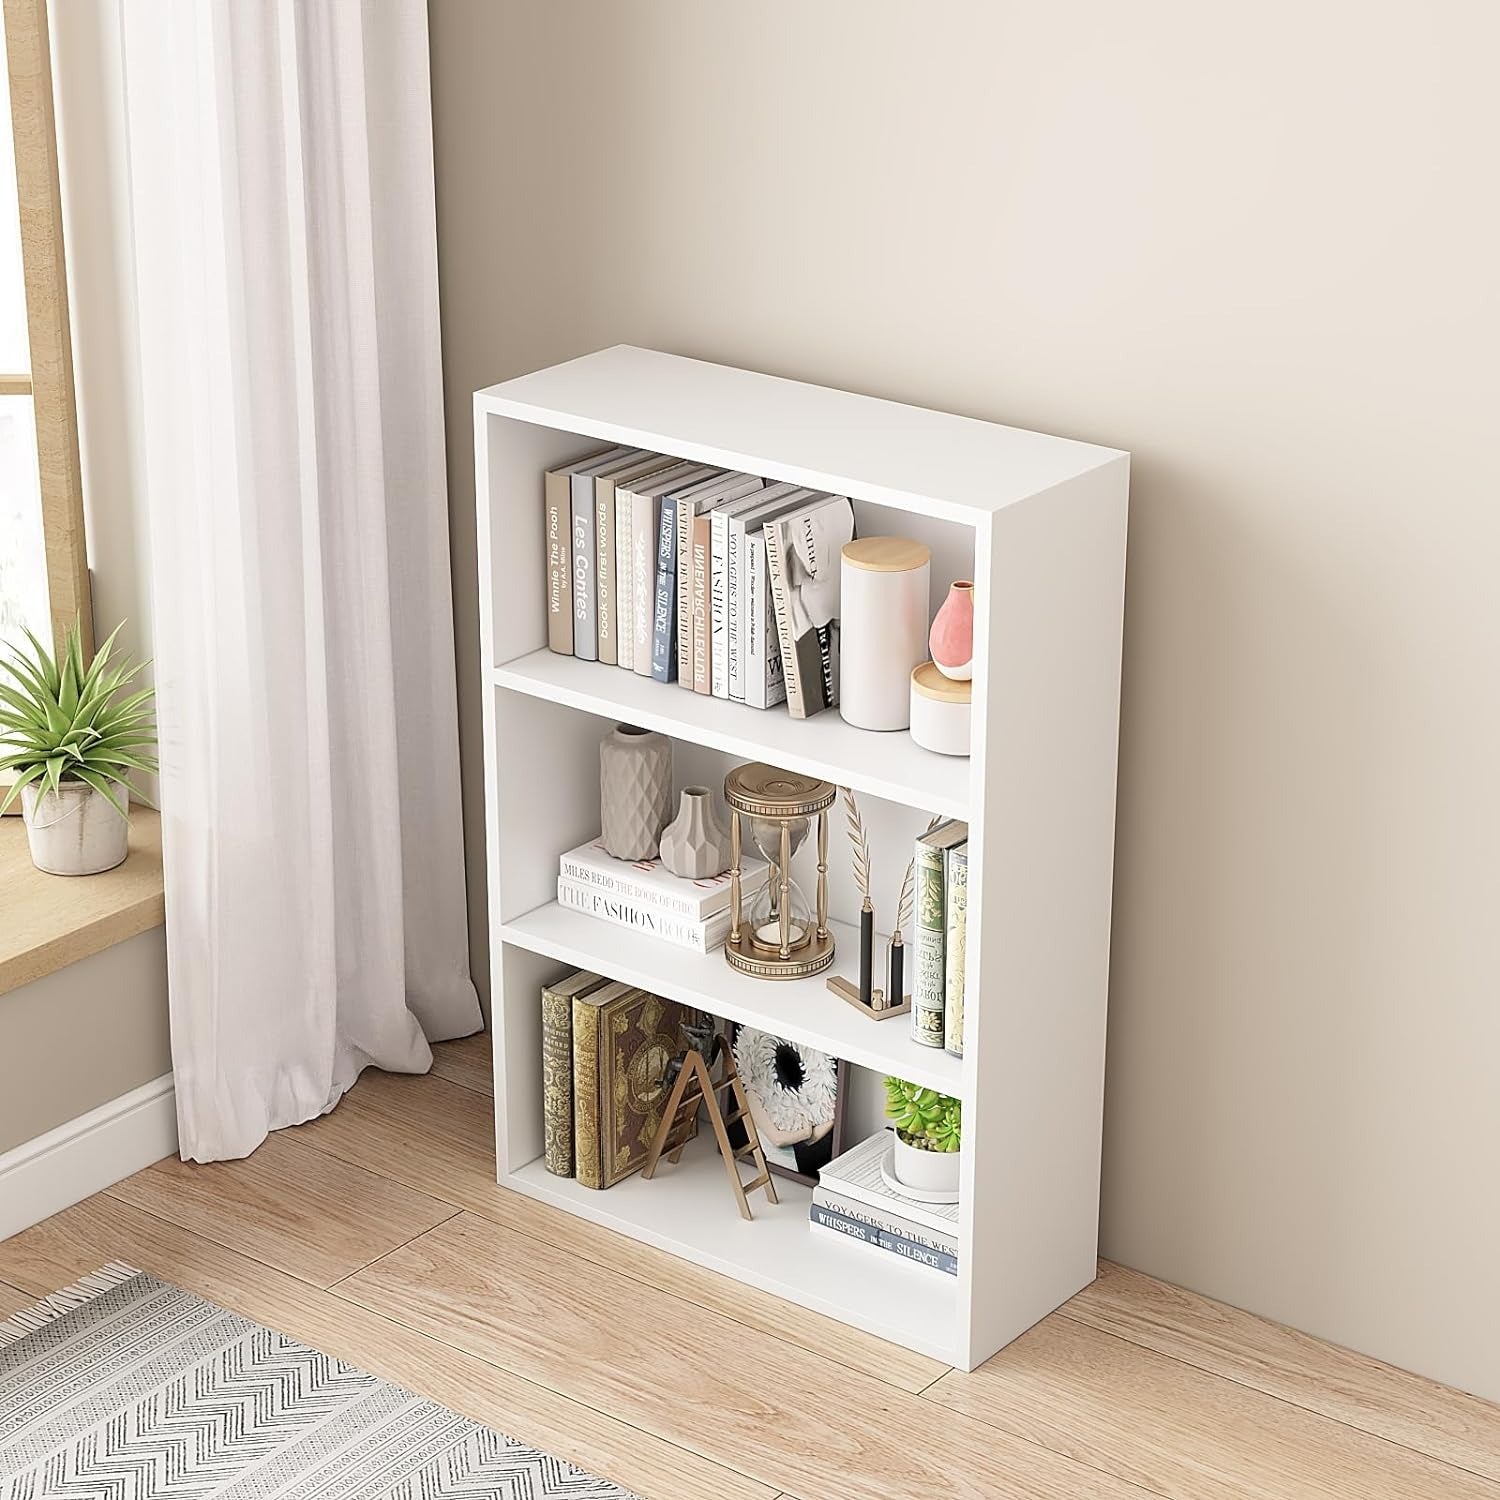 3-Tier Cube Display Shelves in white